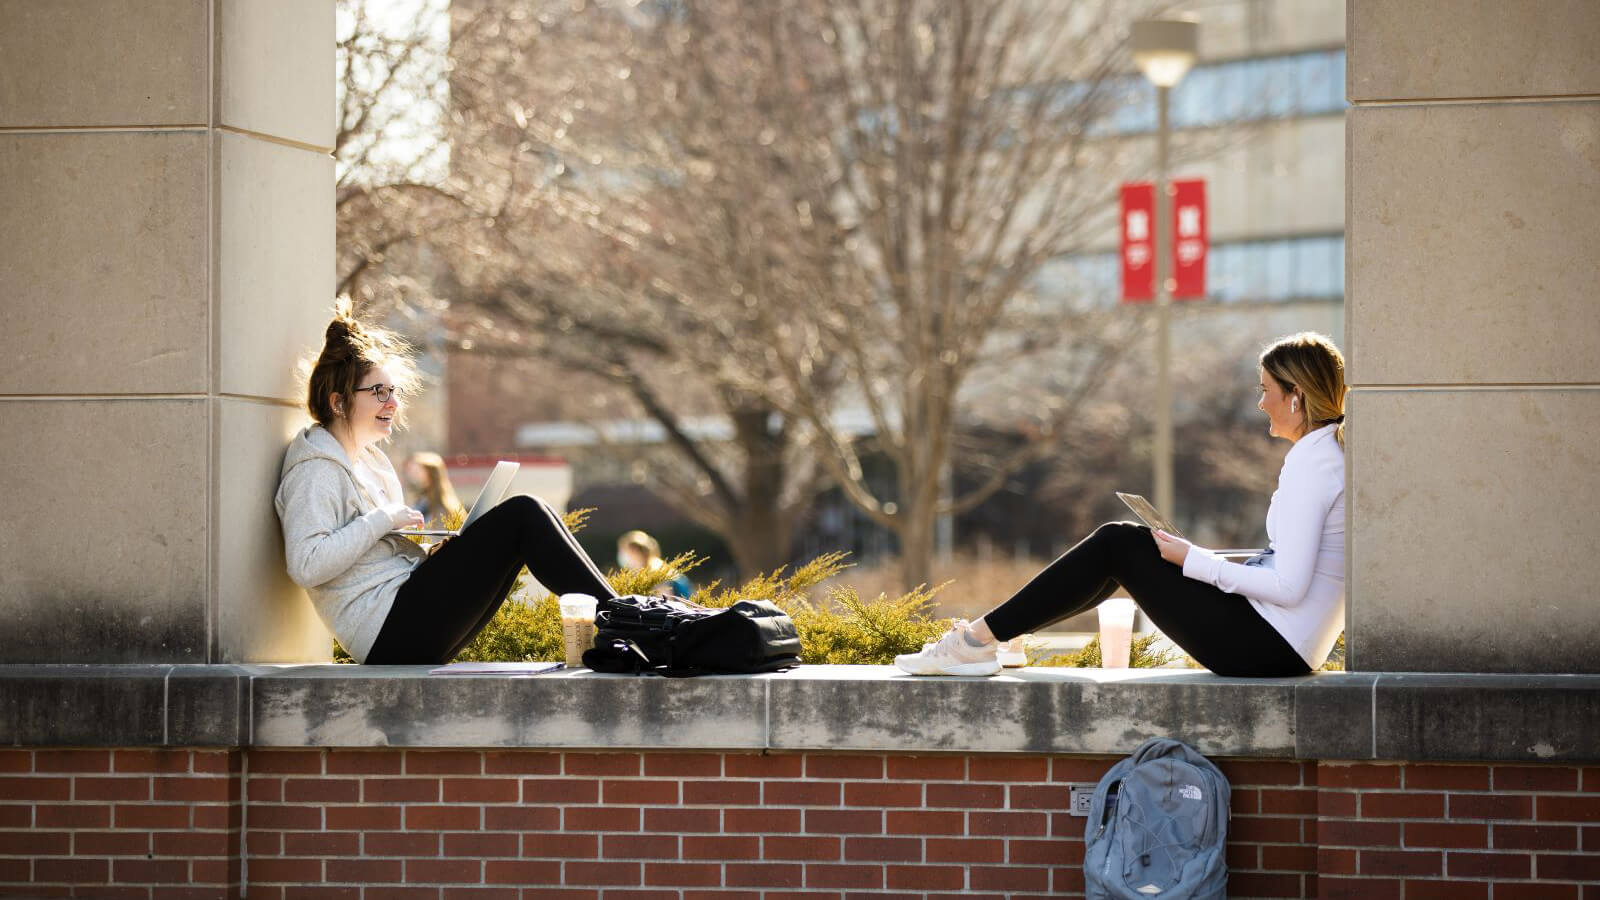 Two students talk between a building's columns on a bright spring day